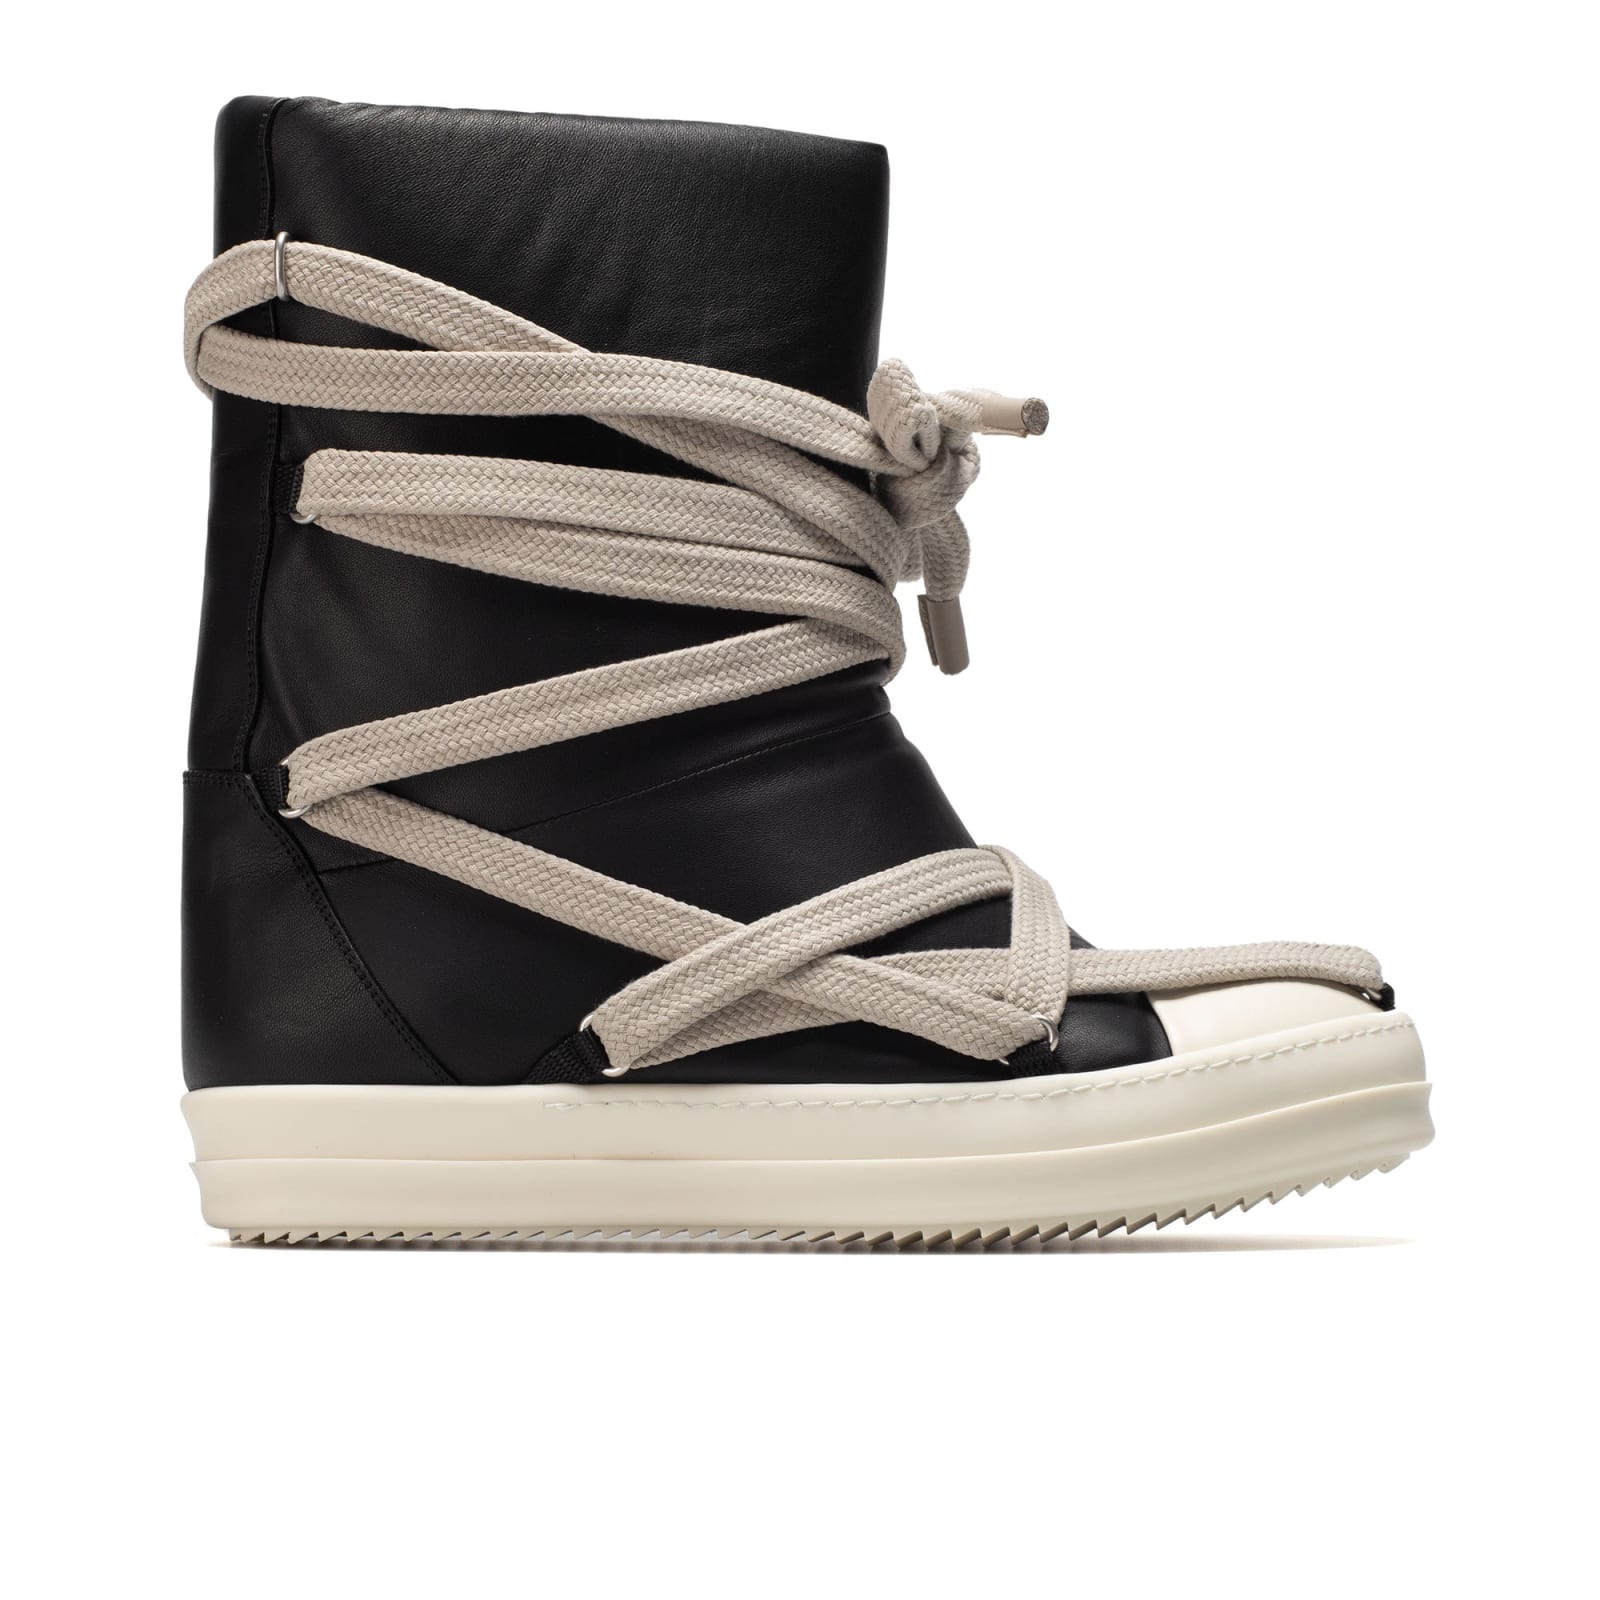 Rick Owens Jumbo Puffer Megalaced Boots